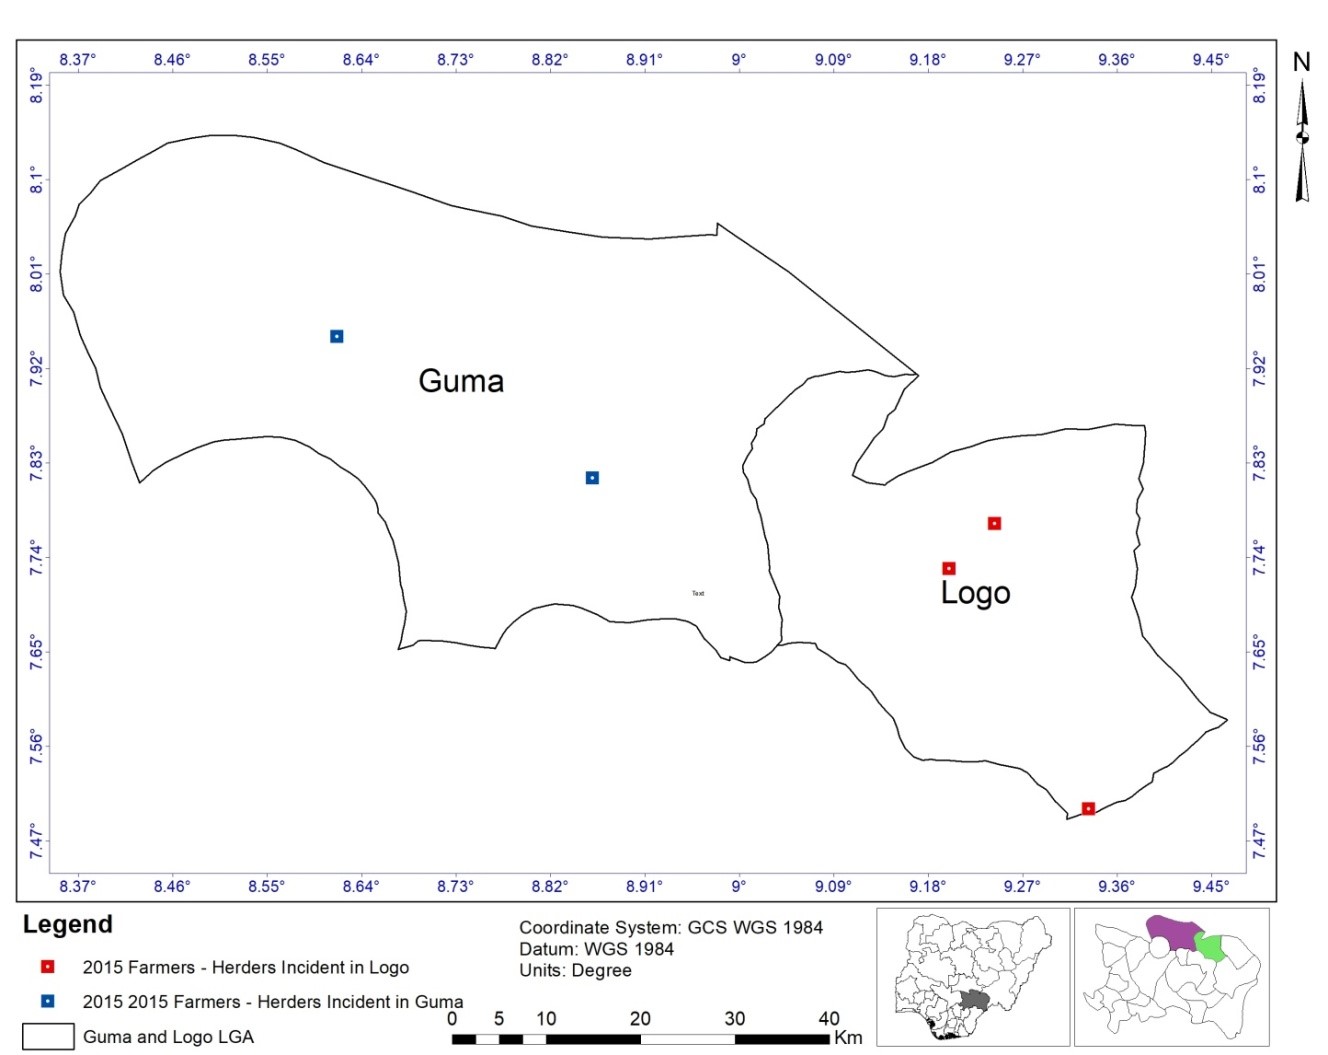 Incidence Locations of Farmers-Herders Conflict in Guma and Logo LGAs